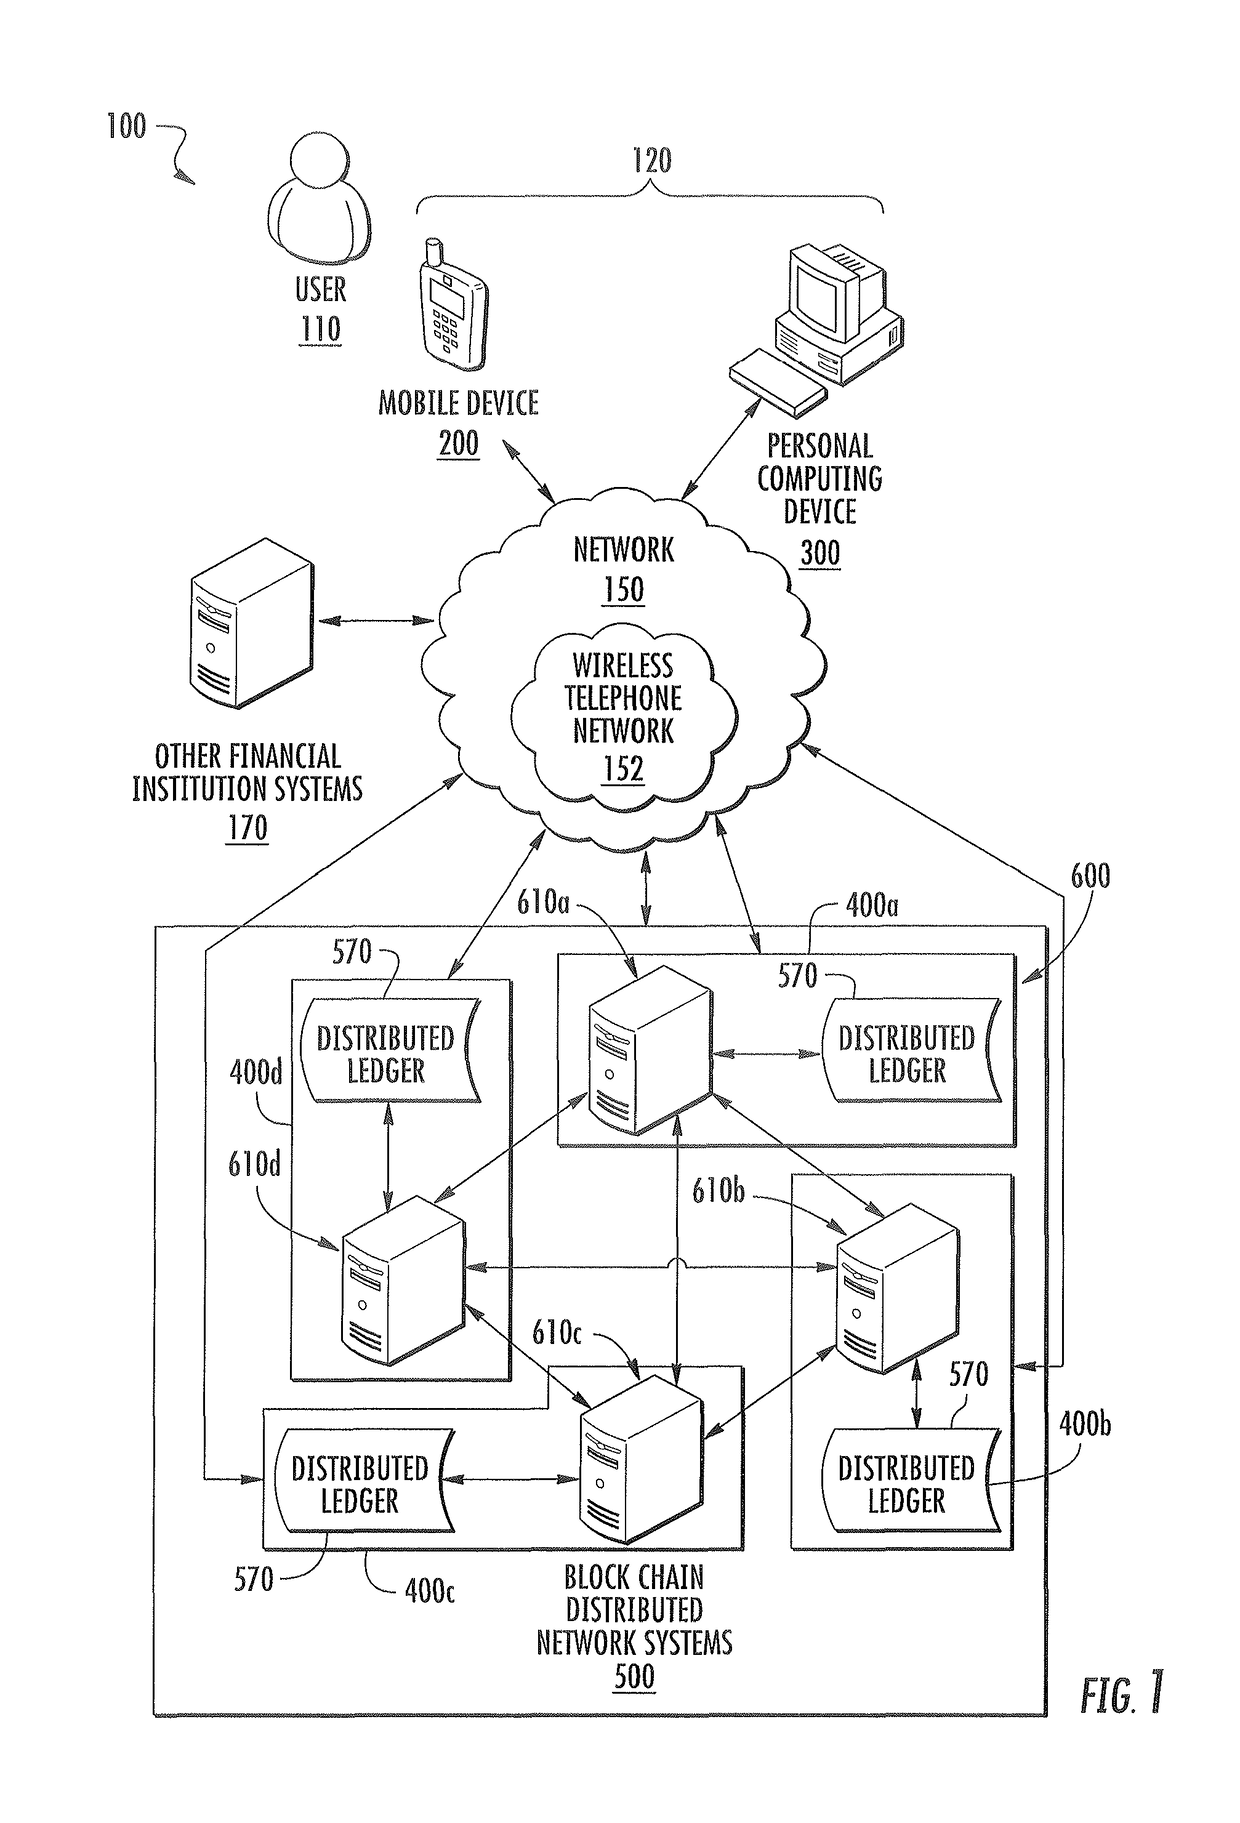 System for external validation of secure process transactions